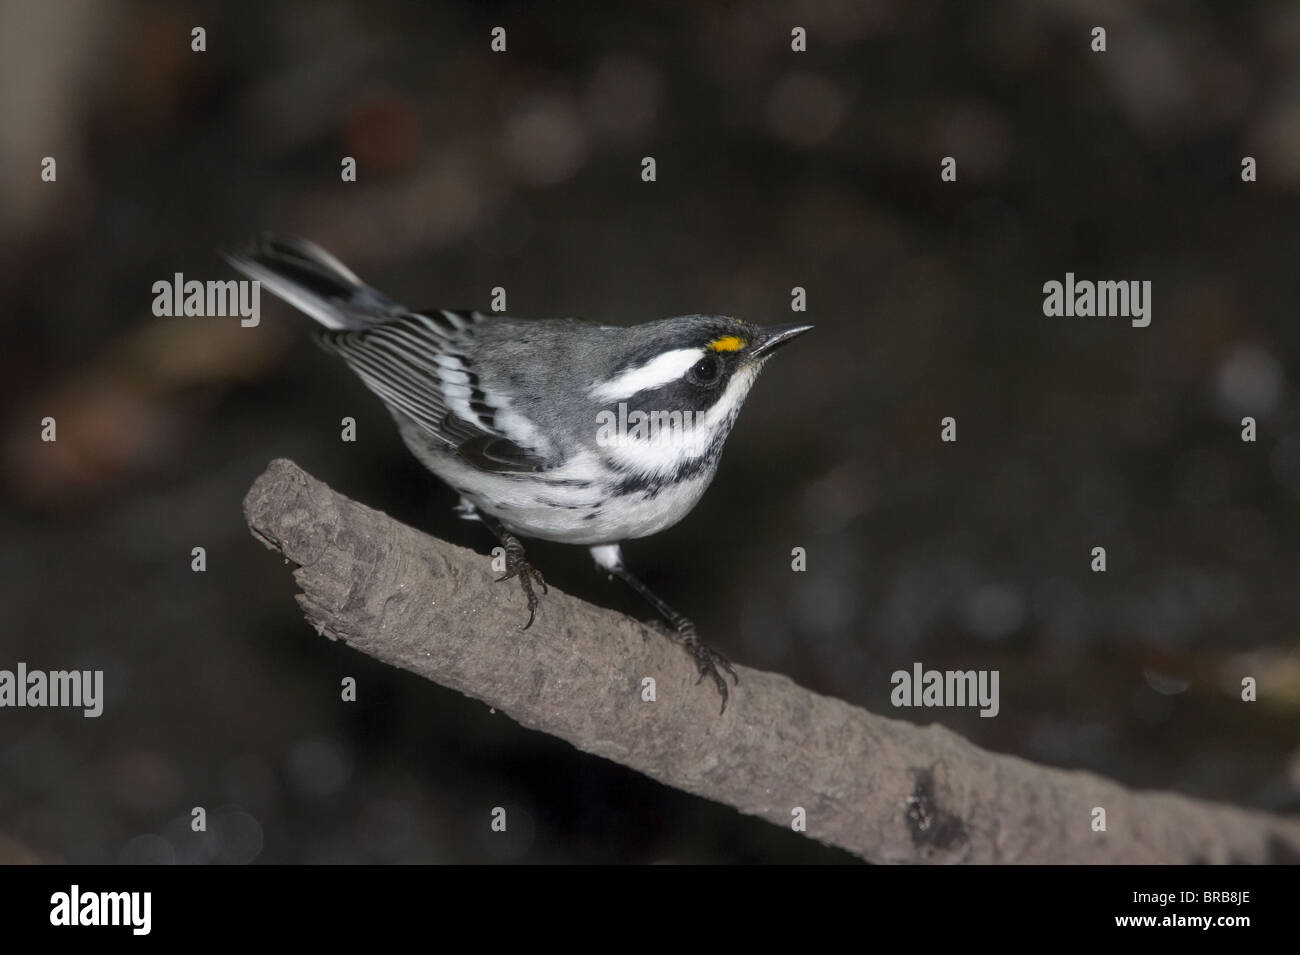 Adult Male Black-throated Gray Warbler Perched on a Branch Stock Photo